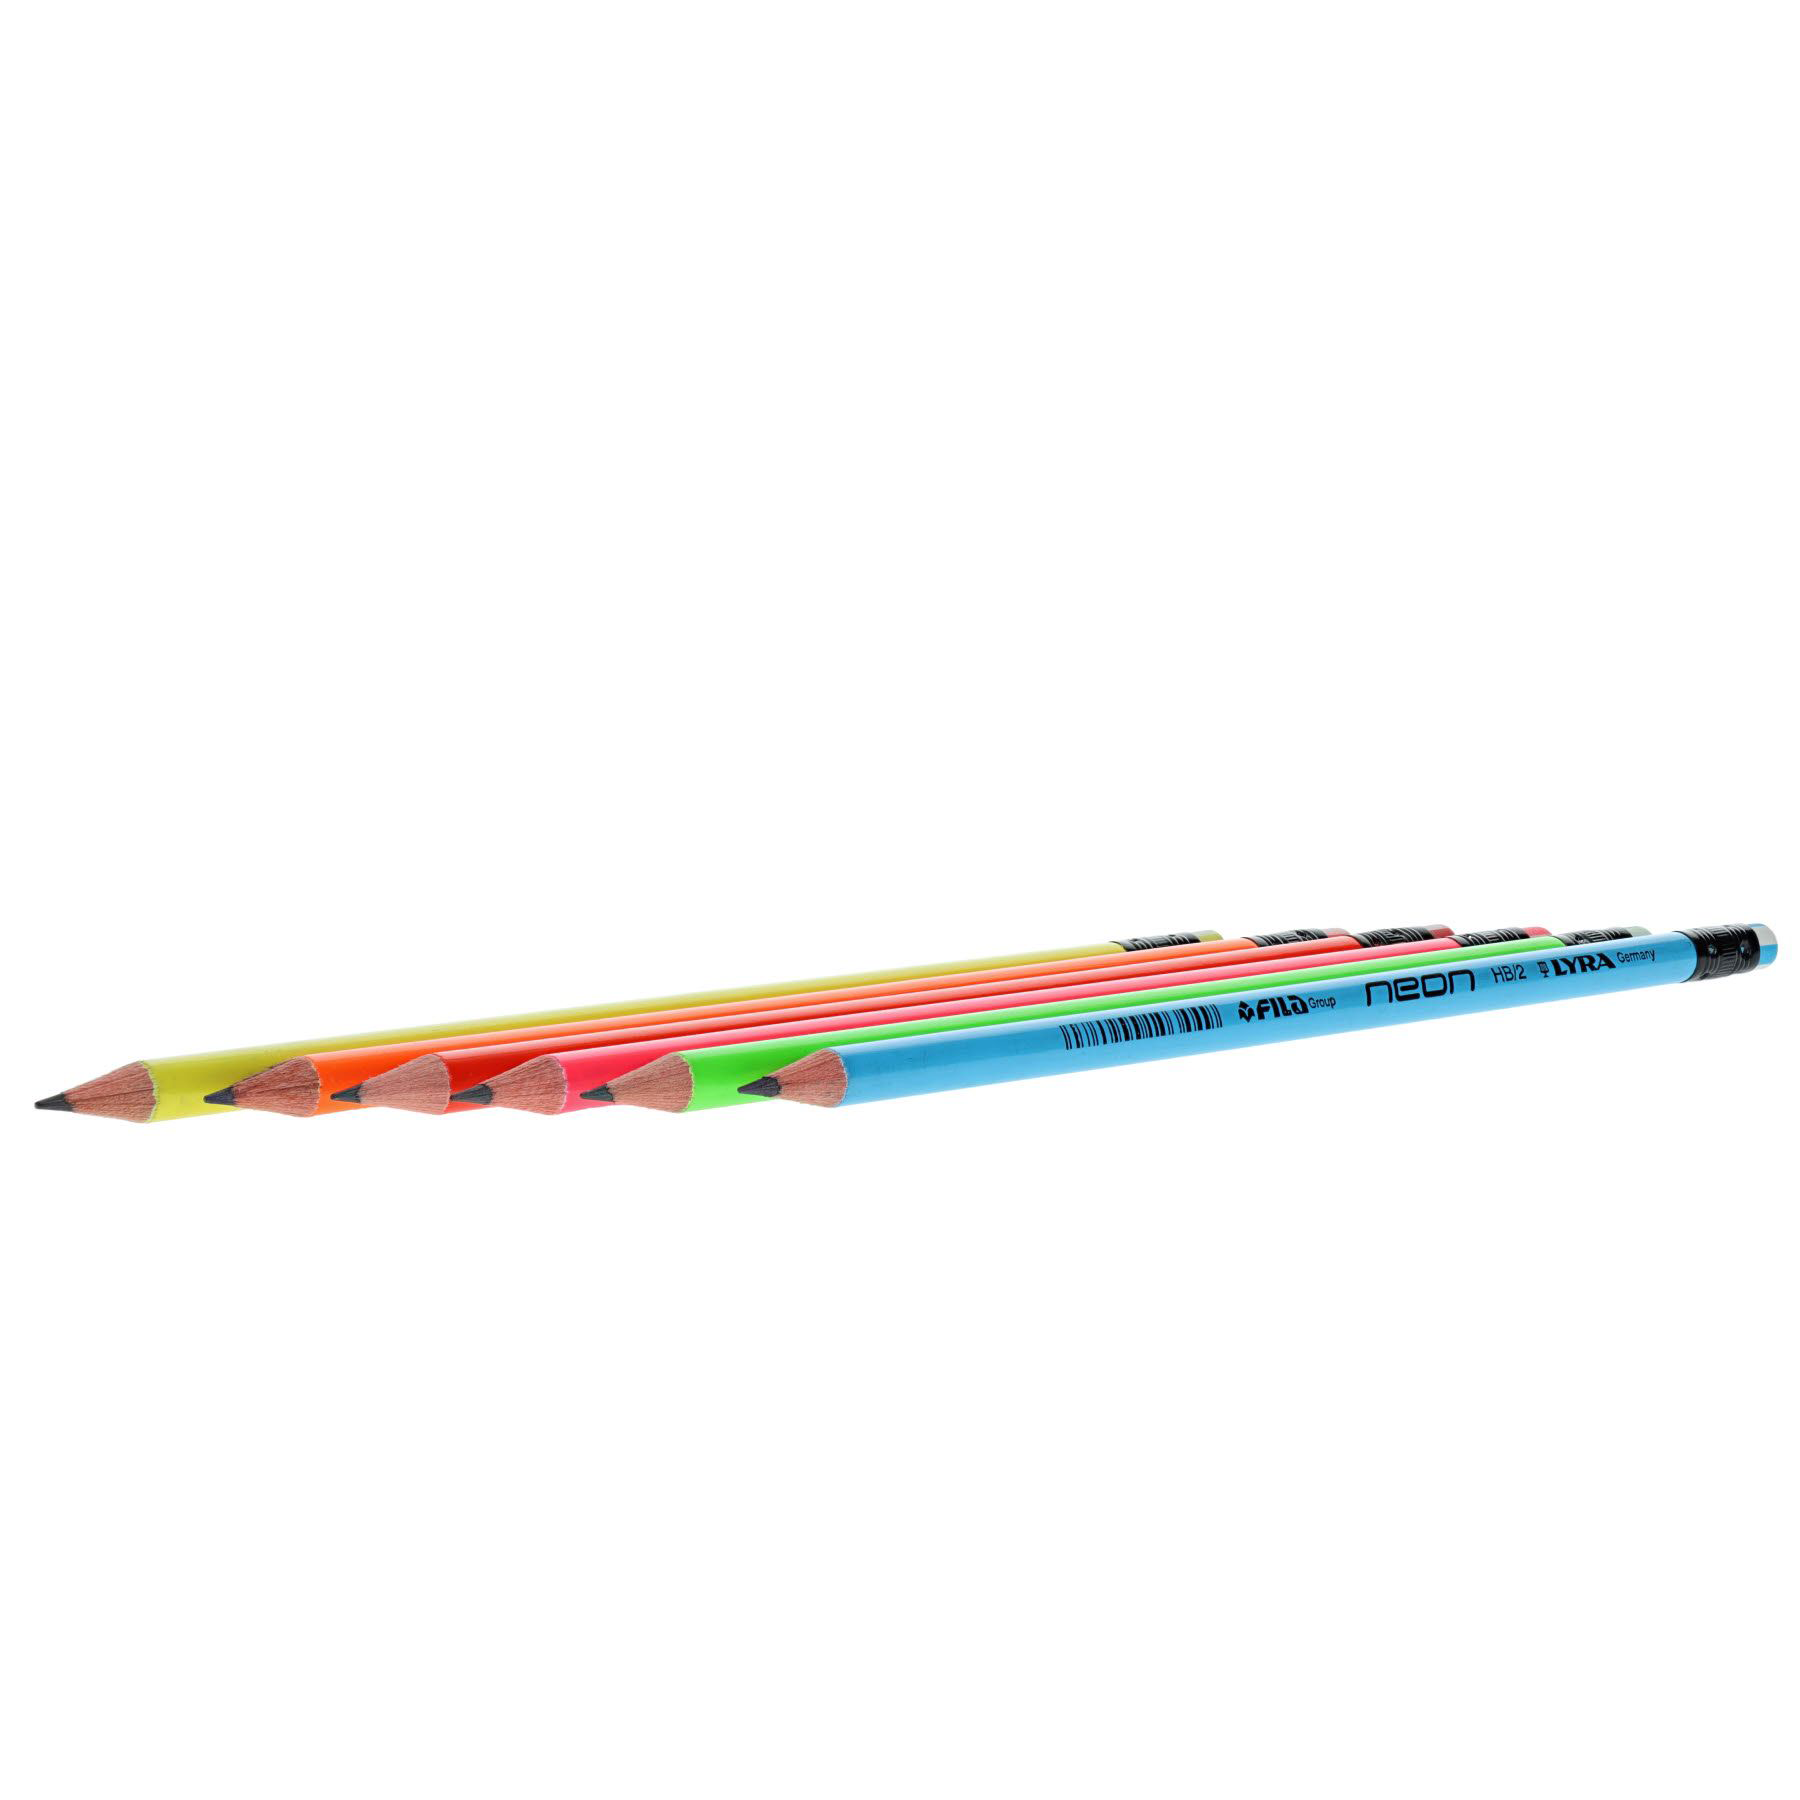 Neon Card 6 Rubber Tipped Hb Pencils